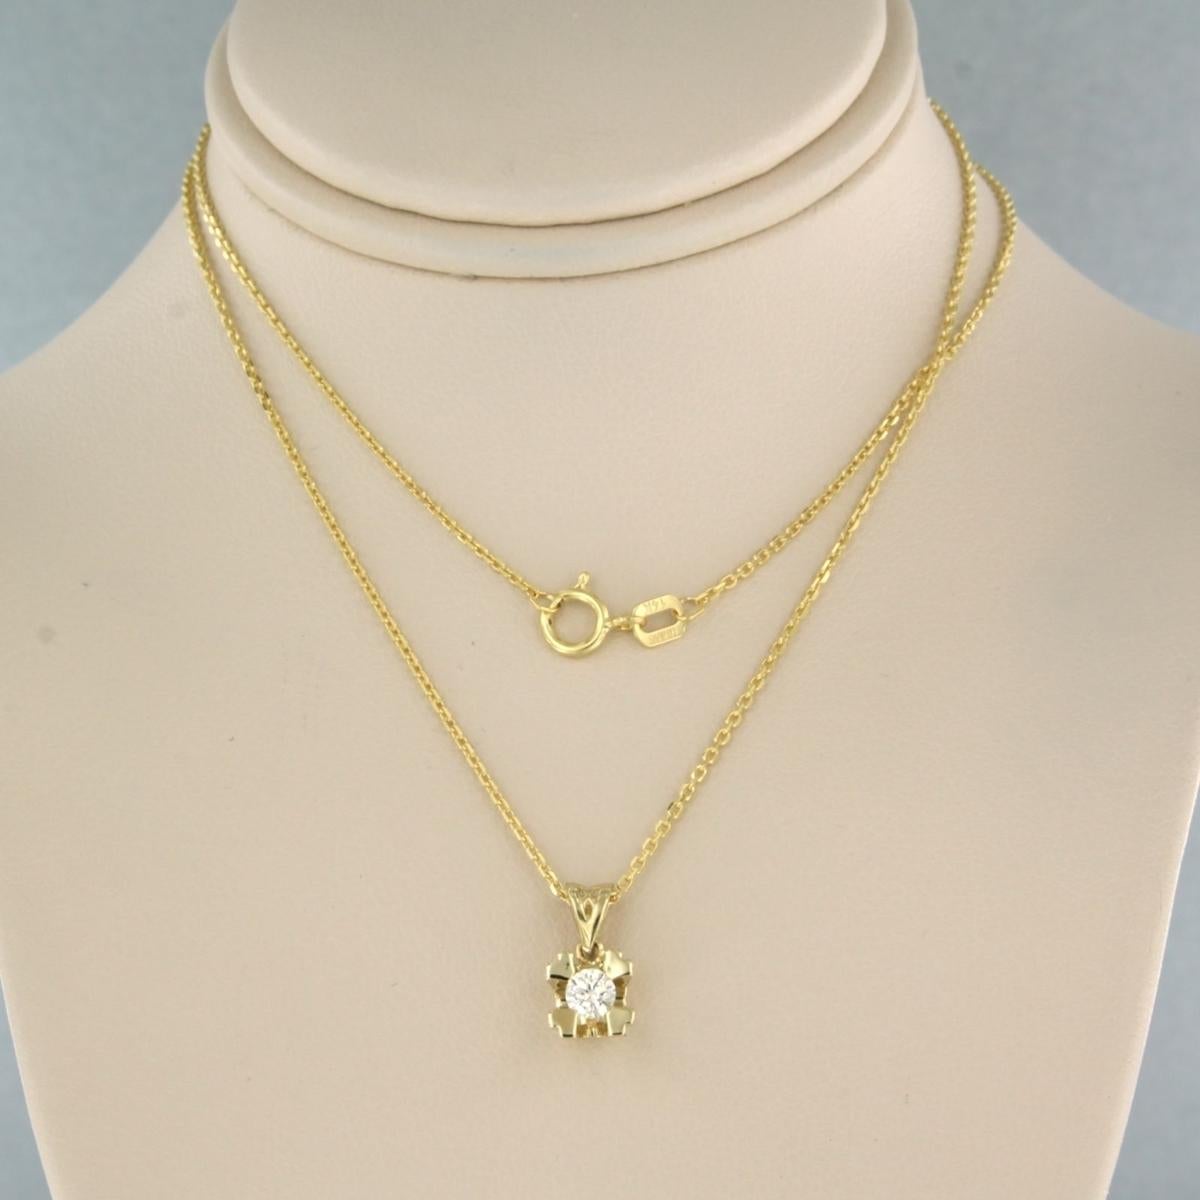 14k yellow gold necklace with pendant set with brilliant cut diamond 0.12ct - F/G - VS/SI - 45 cm long

detailed description:

necklace is 45 cm long and 0.5 mm wide

size of the pendant is approximately 1.0 cm by 5.5 mm wide

total weight: 2.0